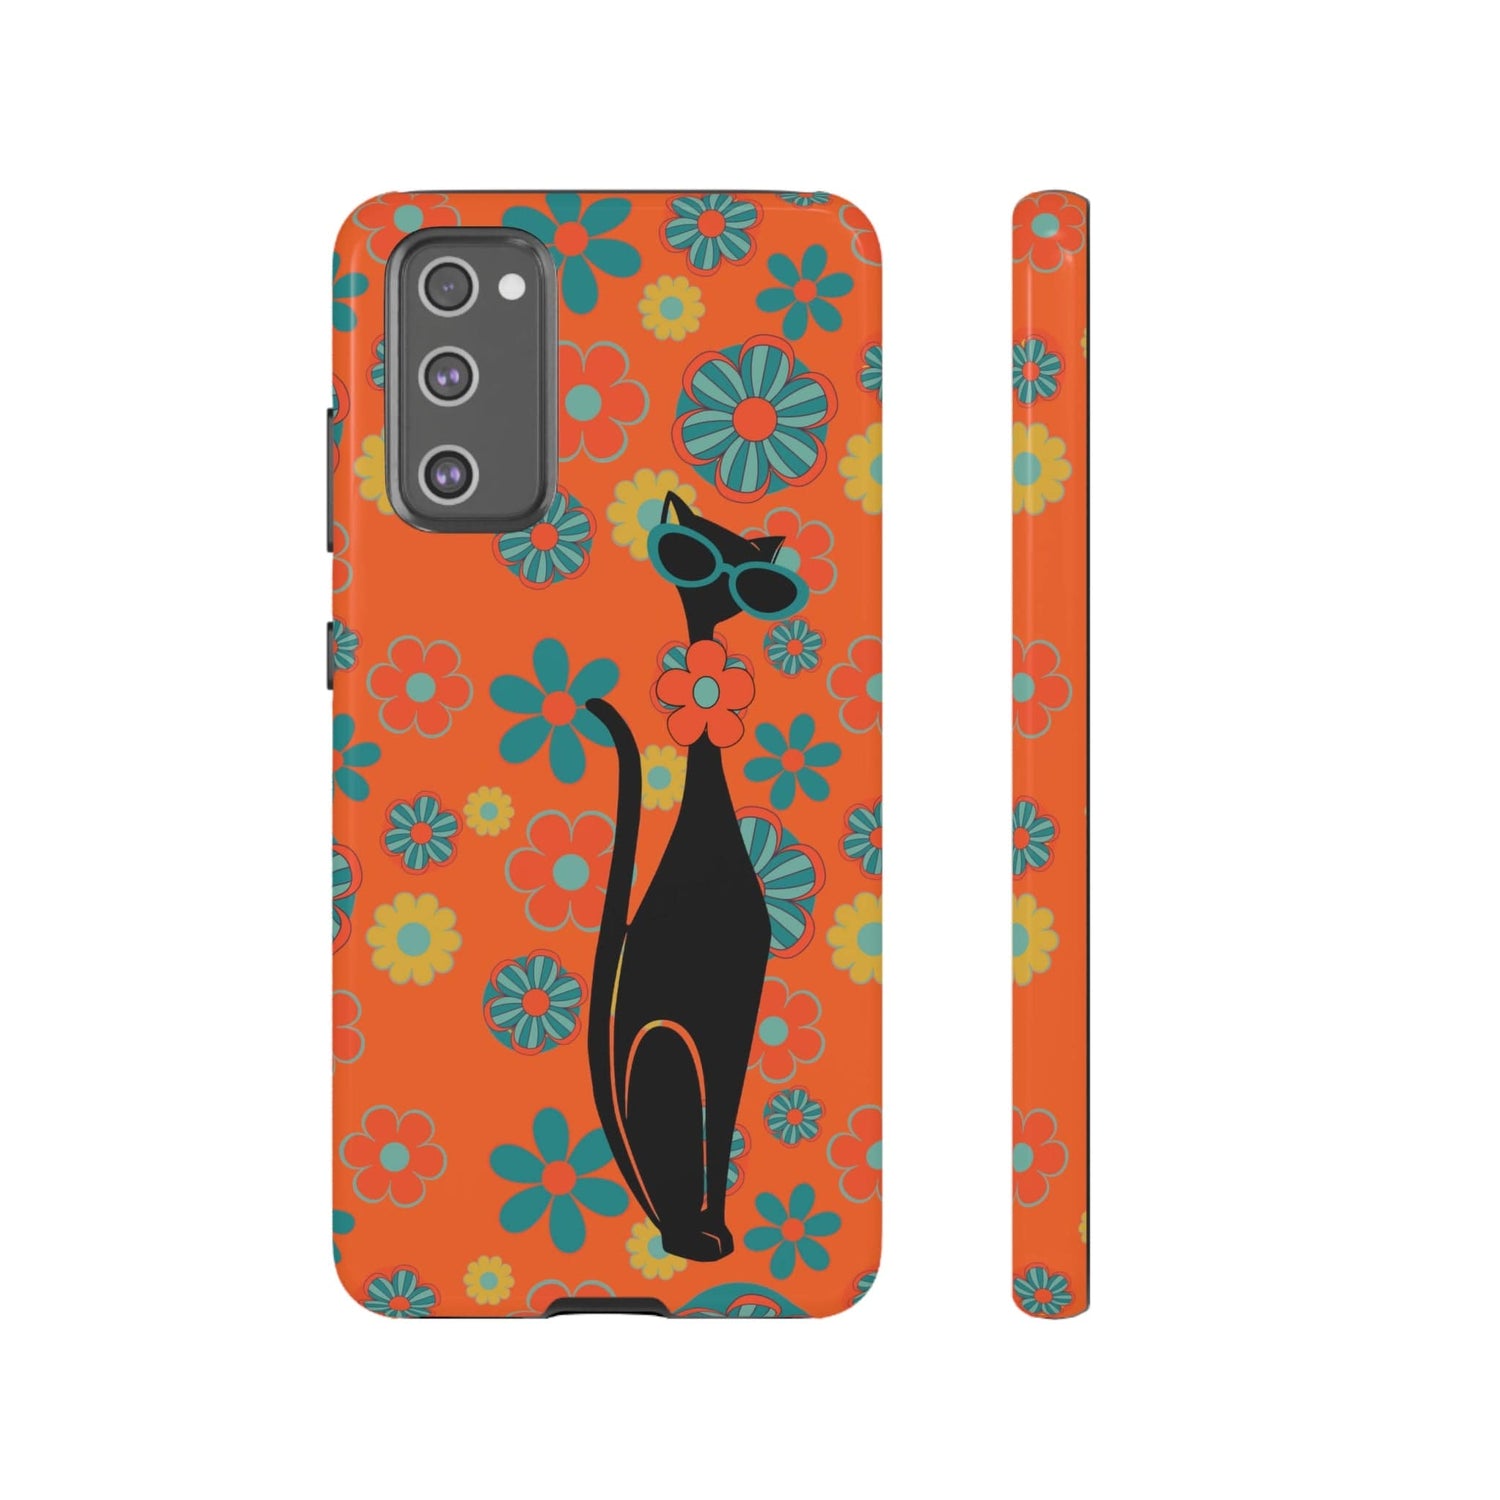 Flower Power, Retro Groovy Atomic Cat, Hipster Style Orange Samsung Galaxy and Google Pixel Tough Cases Phone Case Samsung Galaxy S20 FE / Glossy